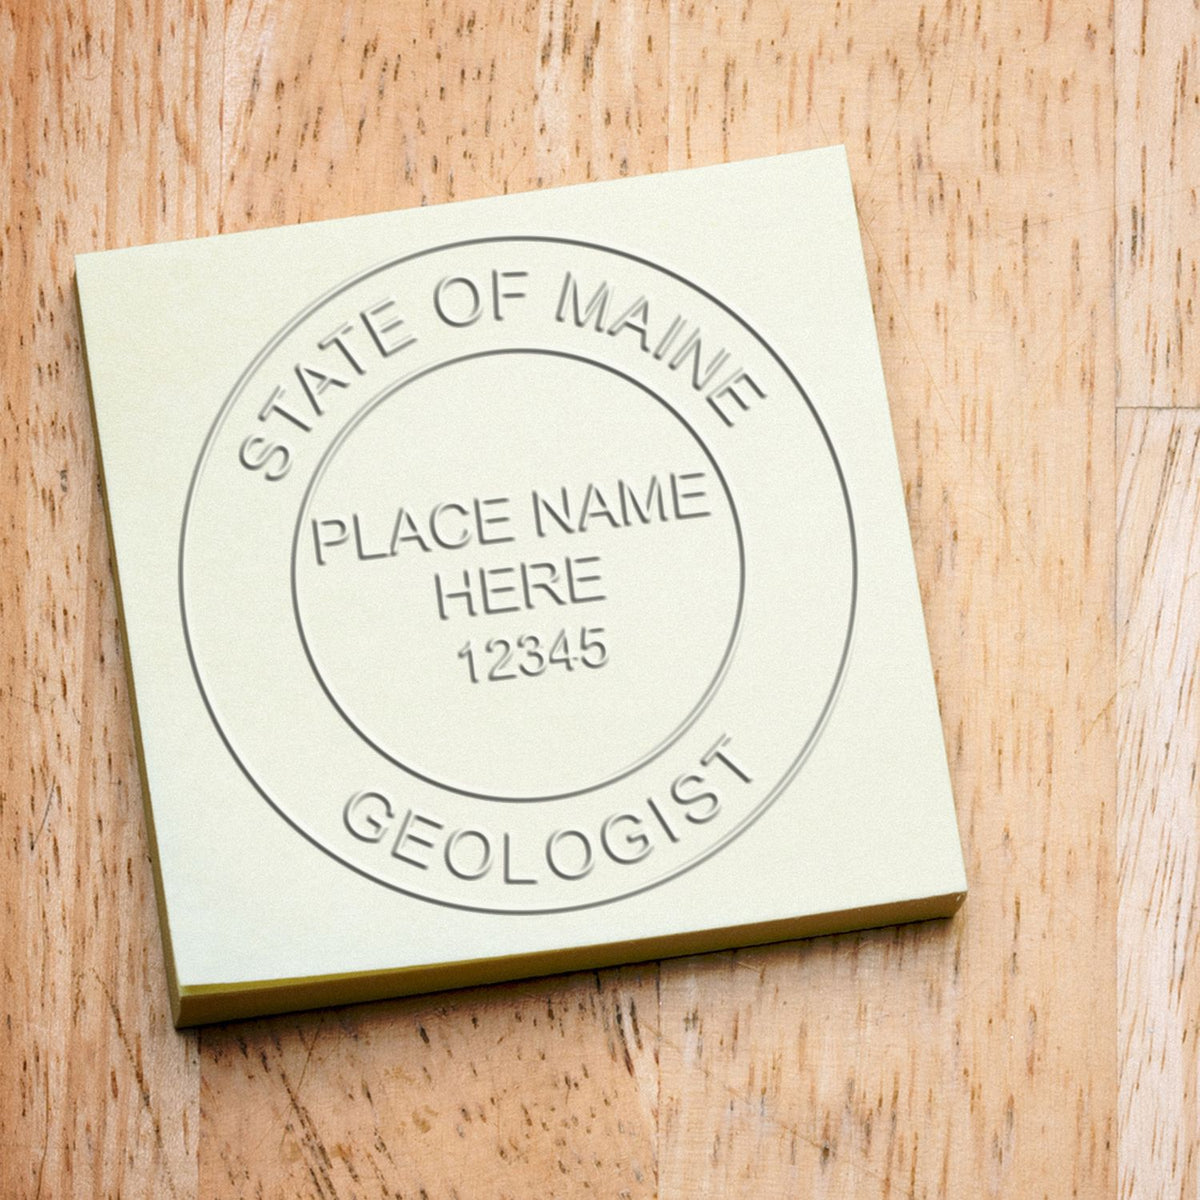 An in use photo of the State of Maine Extended Long Reach Geologist Seal showing a sample imprint on a cardstock